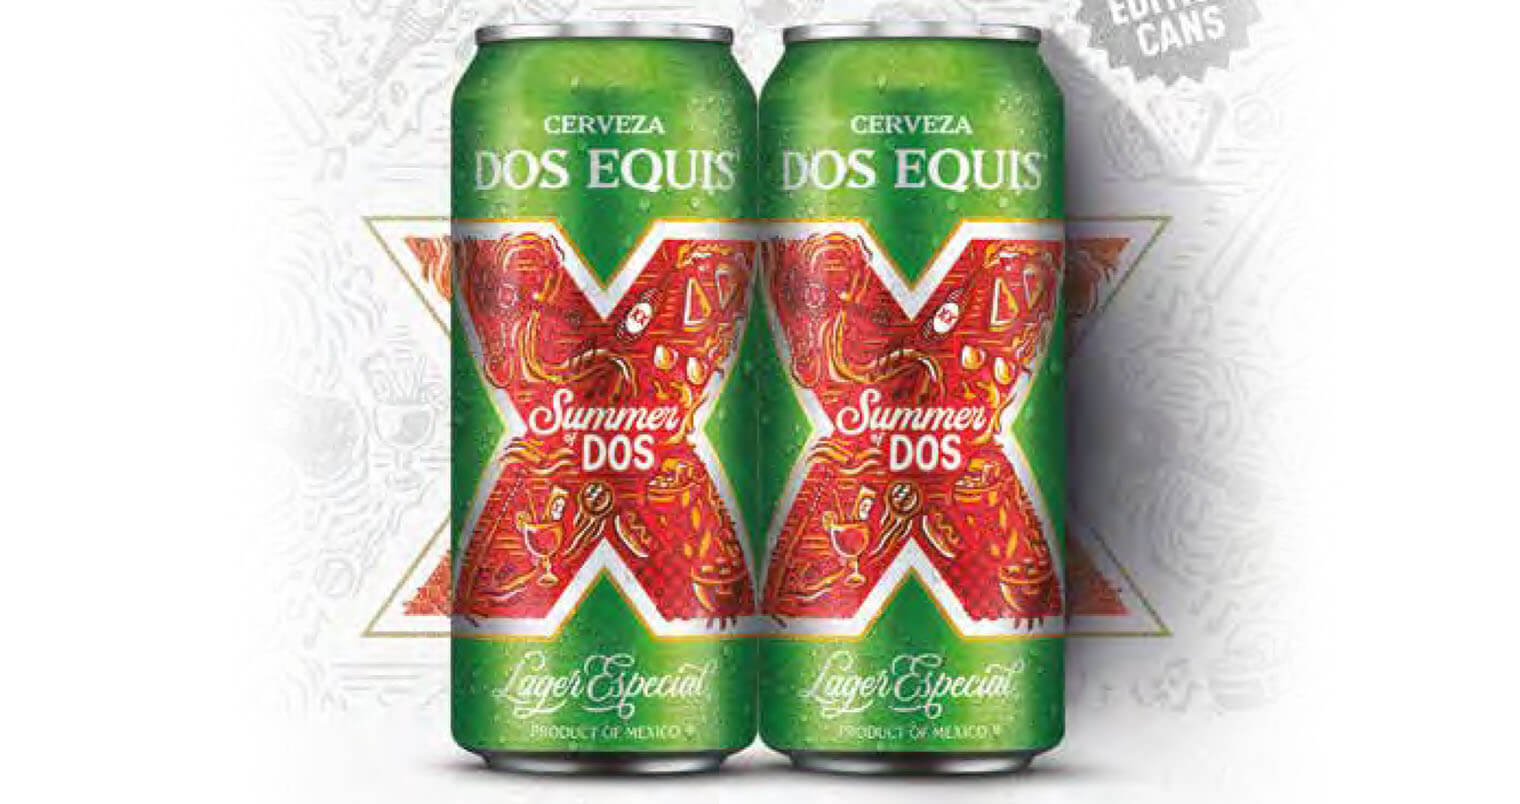 Dos Equis Summer of Dos, featured image